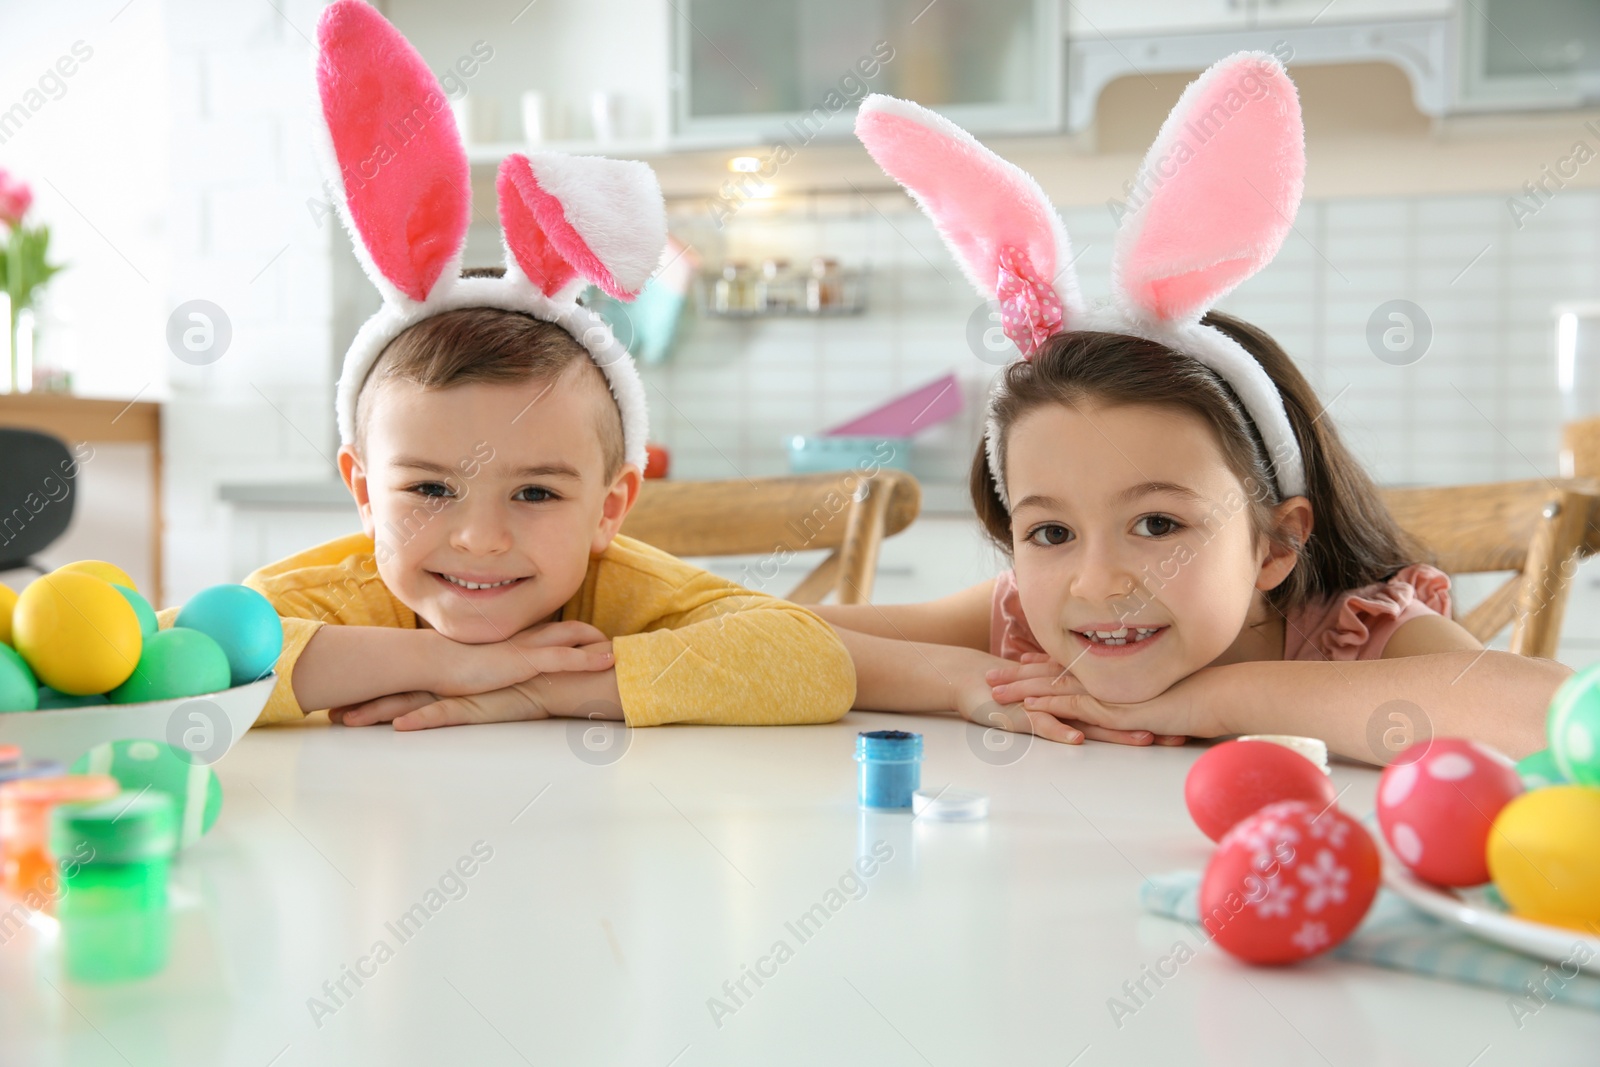 Photo of Cute children with bunny ears headbands and painted Easter eggs sitting at table in kitchen